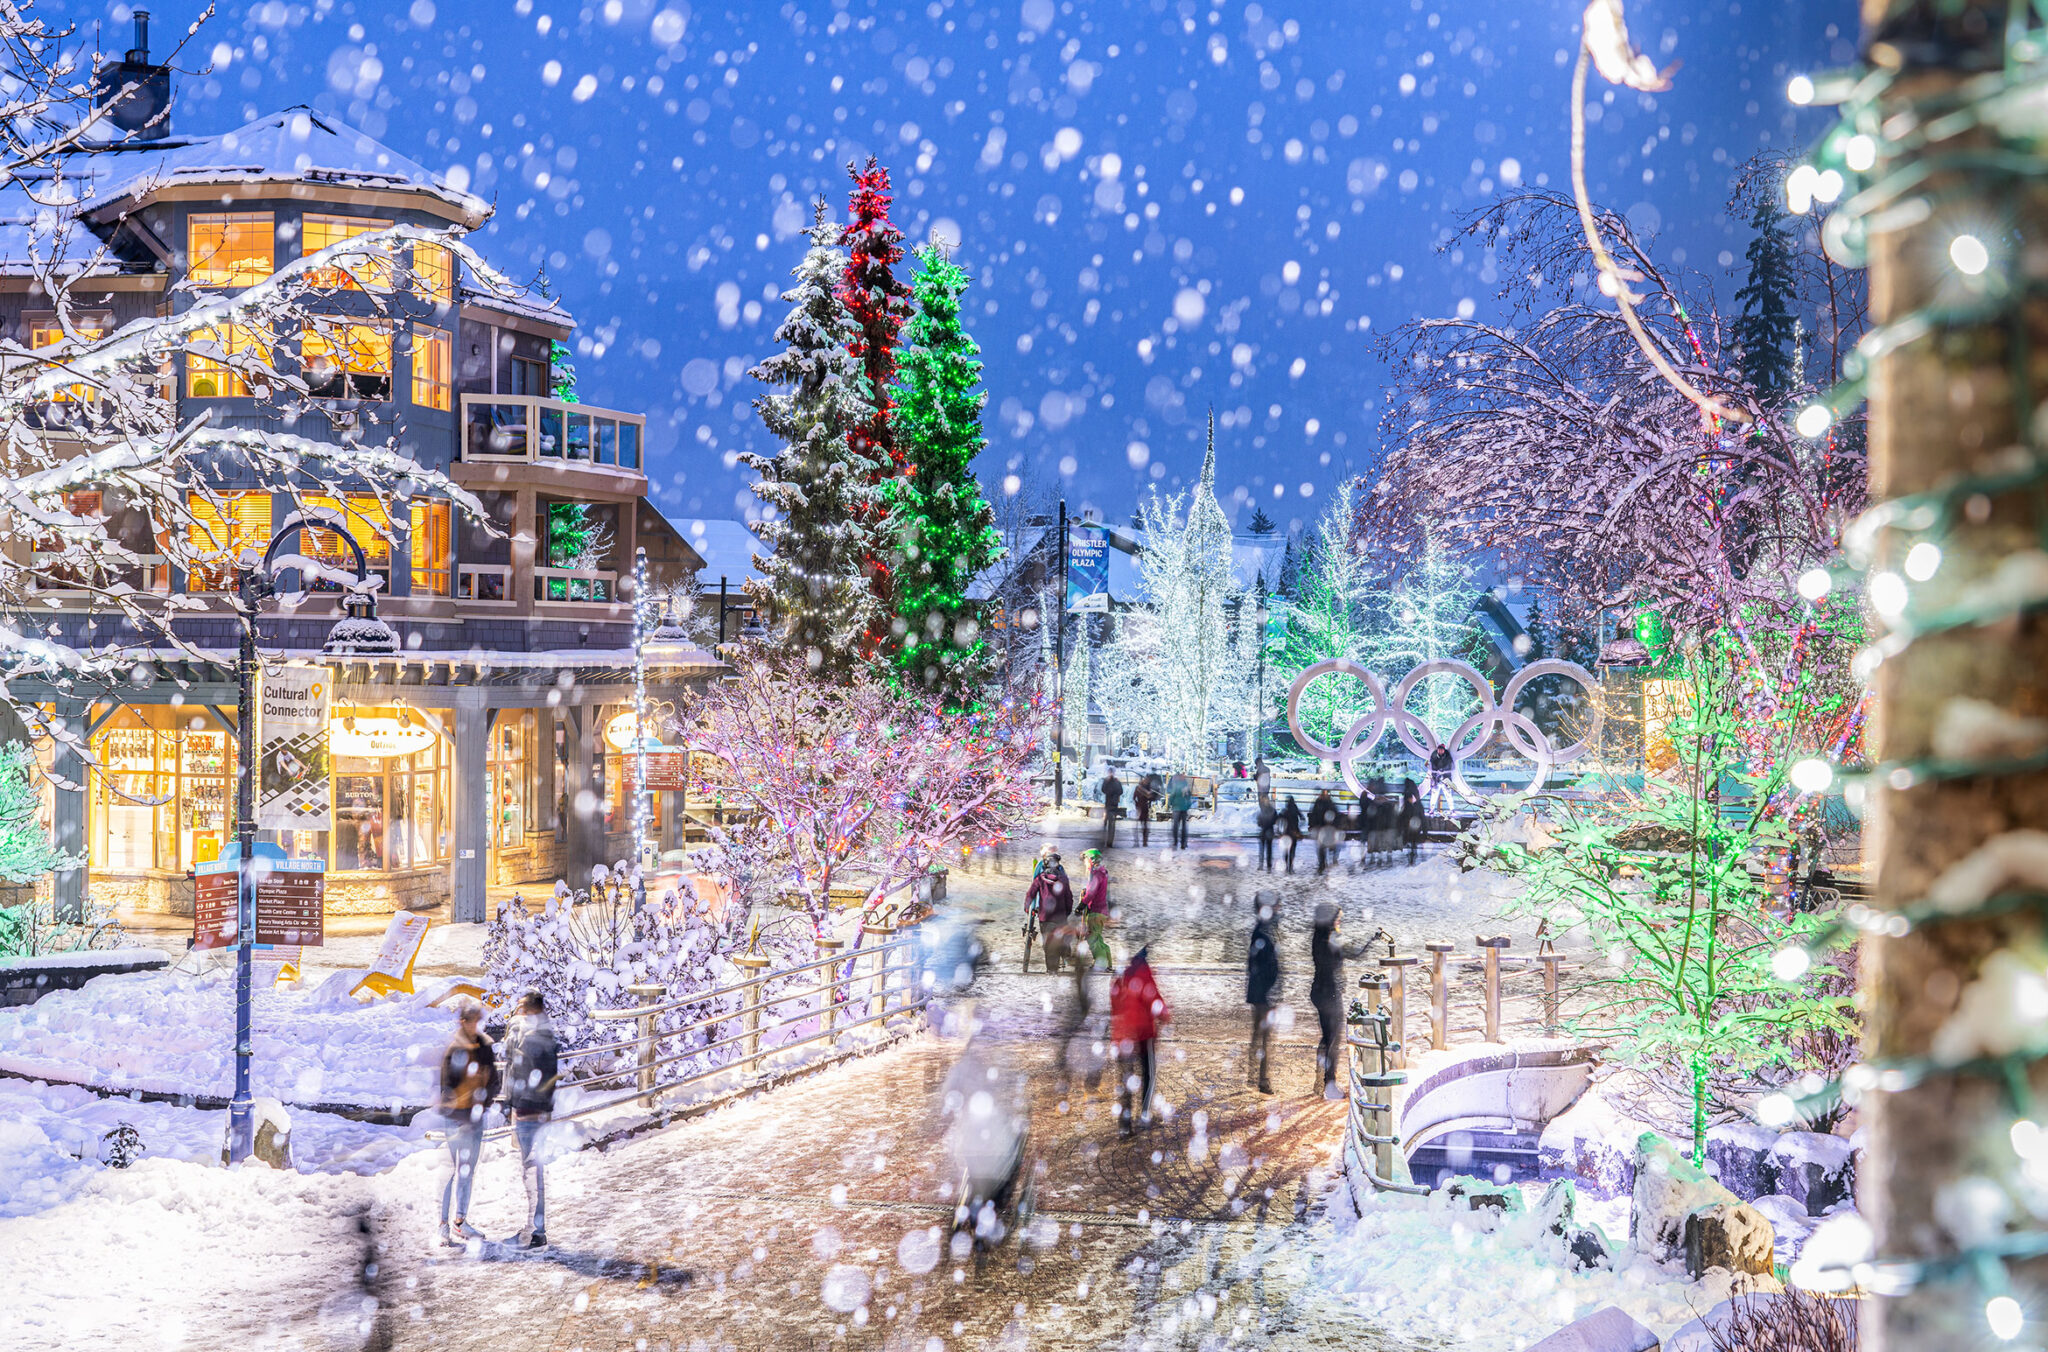 The Whistler Village Stroll lit up with festive lights.